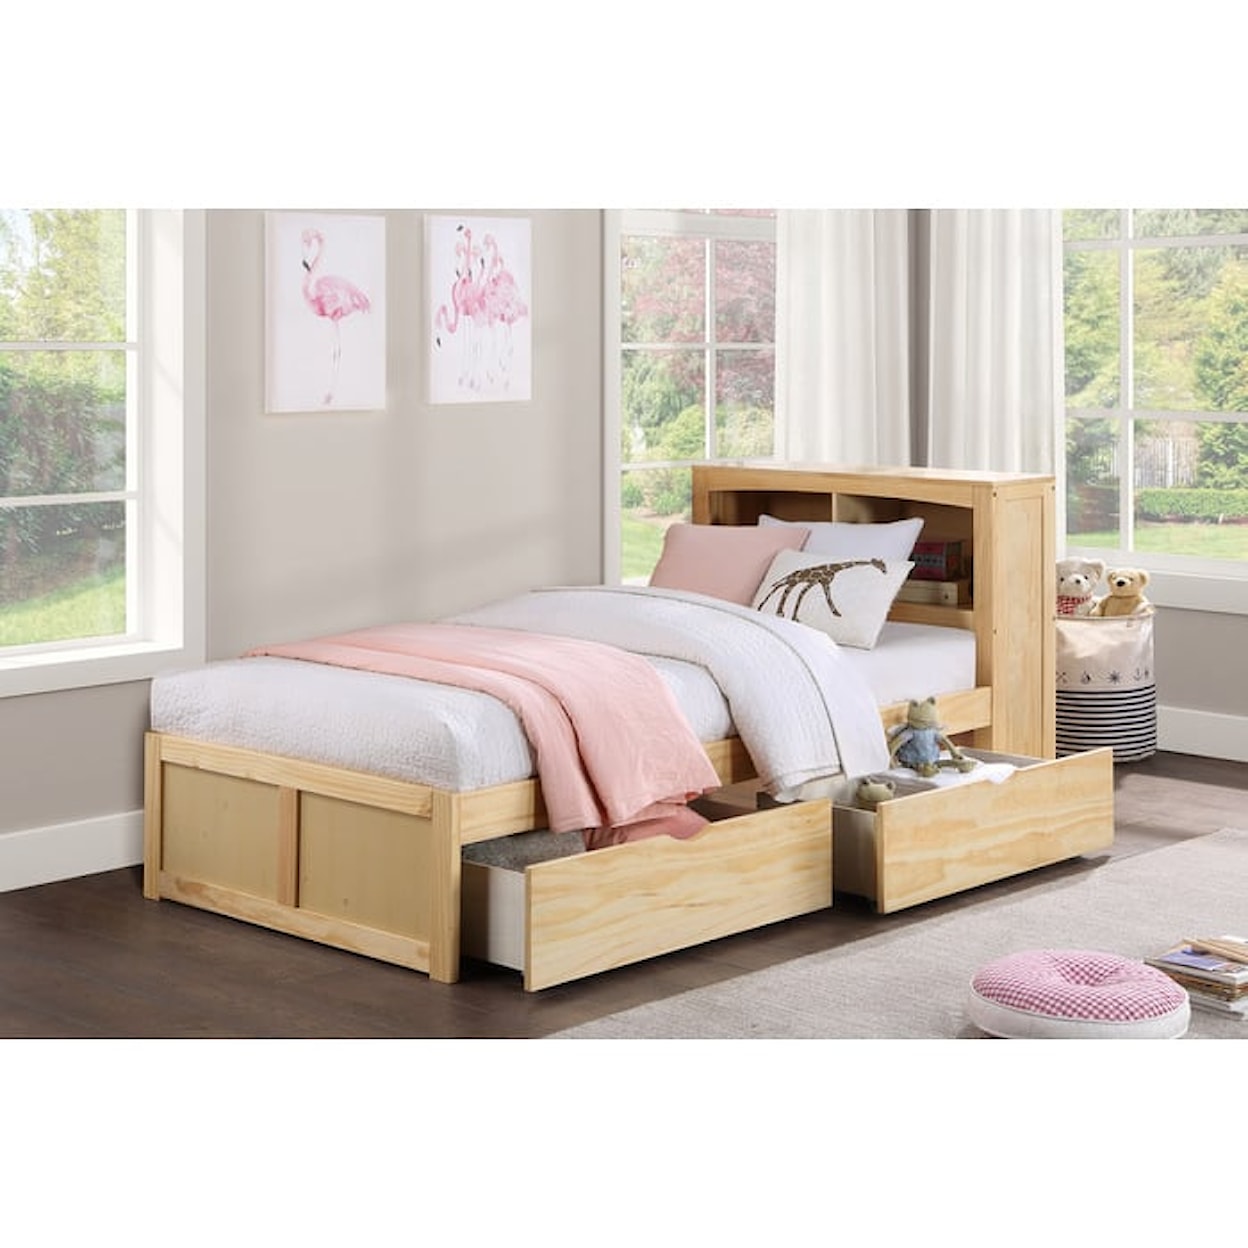 Homelegance Bartly Twin Bed